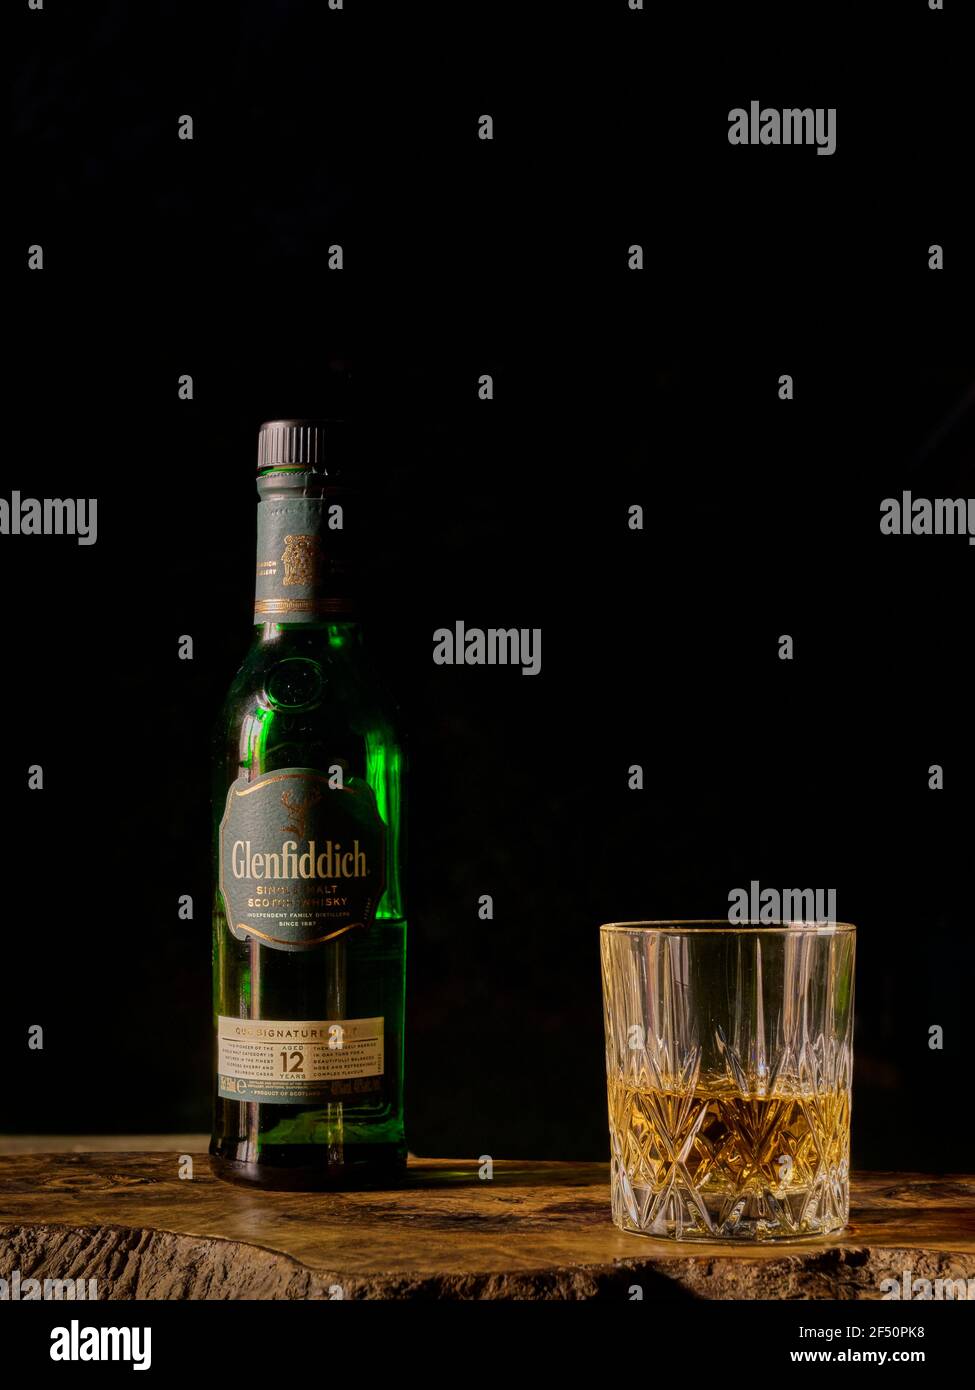 Glenfiddich Scotch Whisky bottle and glass half filled on an olive wood board against a dark black background Stock Photo